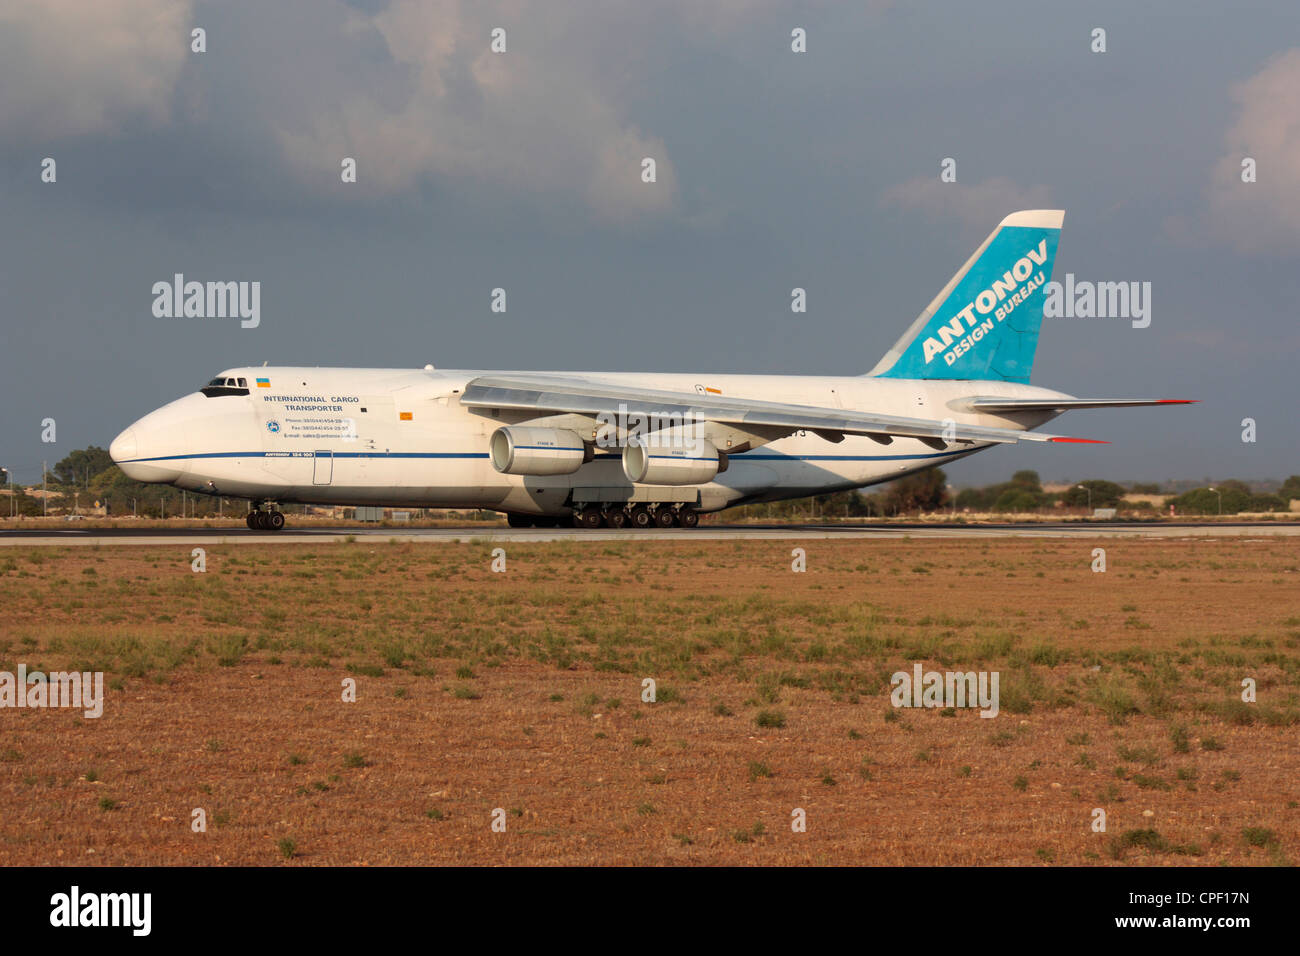 Commercial air freight transport. Antonov Airlines An-124 heavy cargo jet plane lined up on the runway ready for departure from Malta Stock Photo